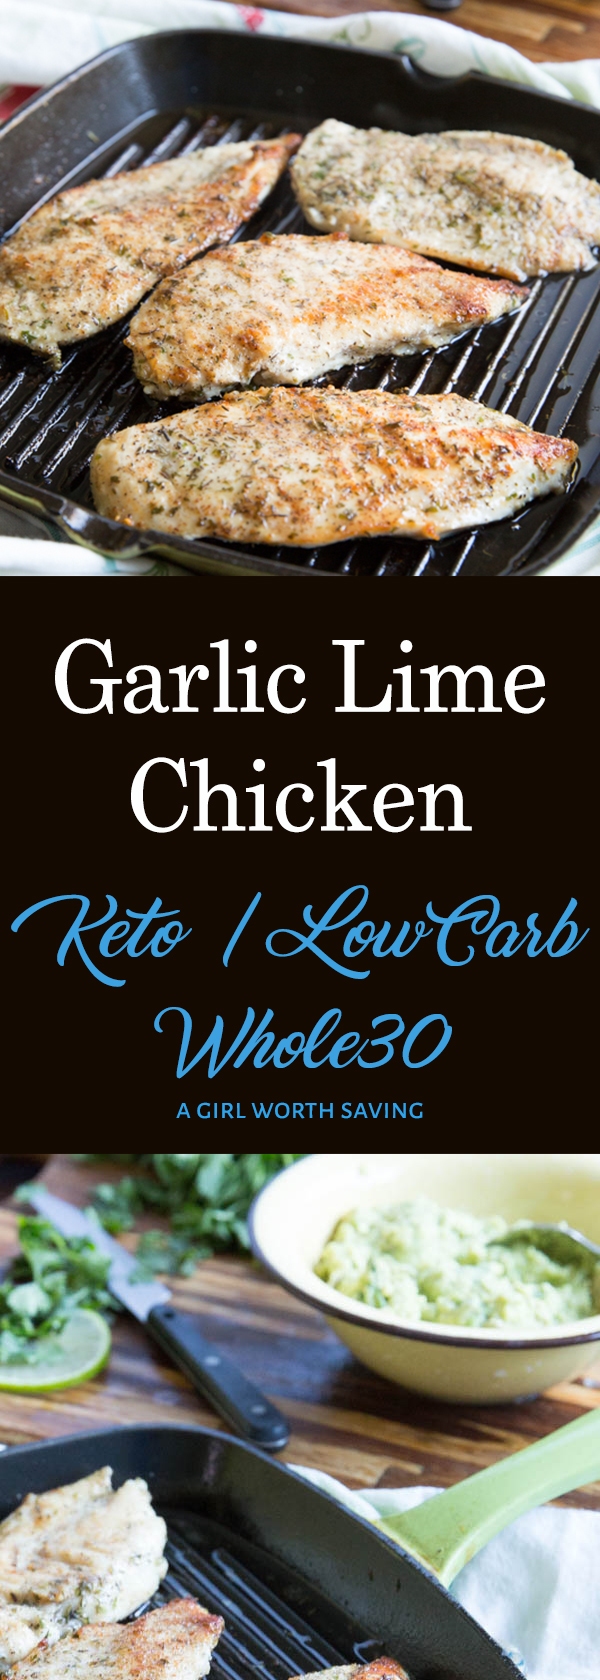 Try out this garlic lime chicken! This low carb Whole 30 friendly chicken is a winner. It is a recipe that you will want to make again and again.